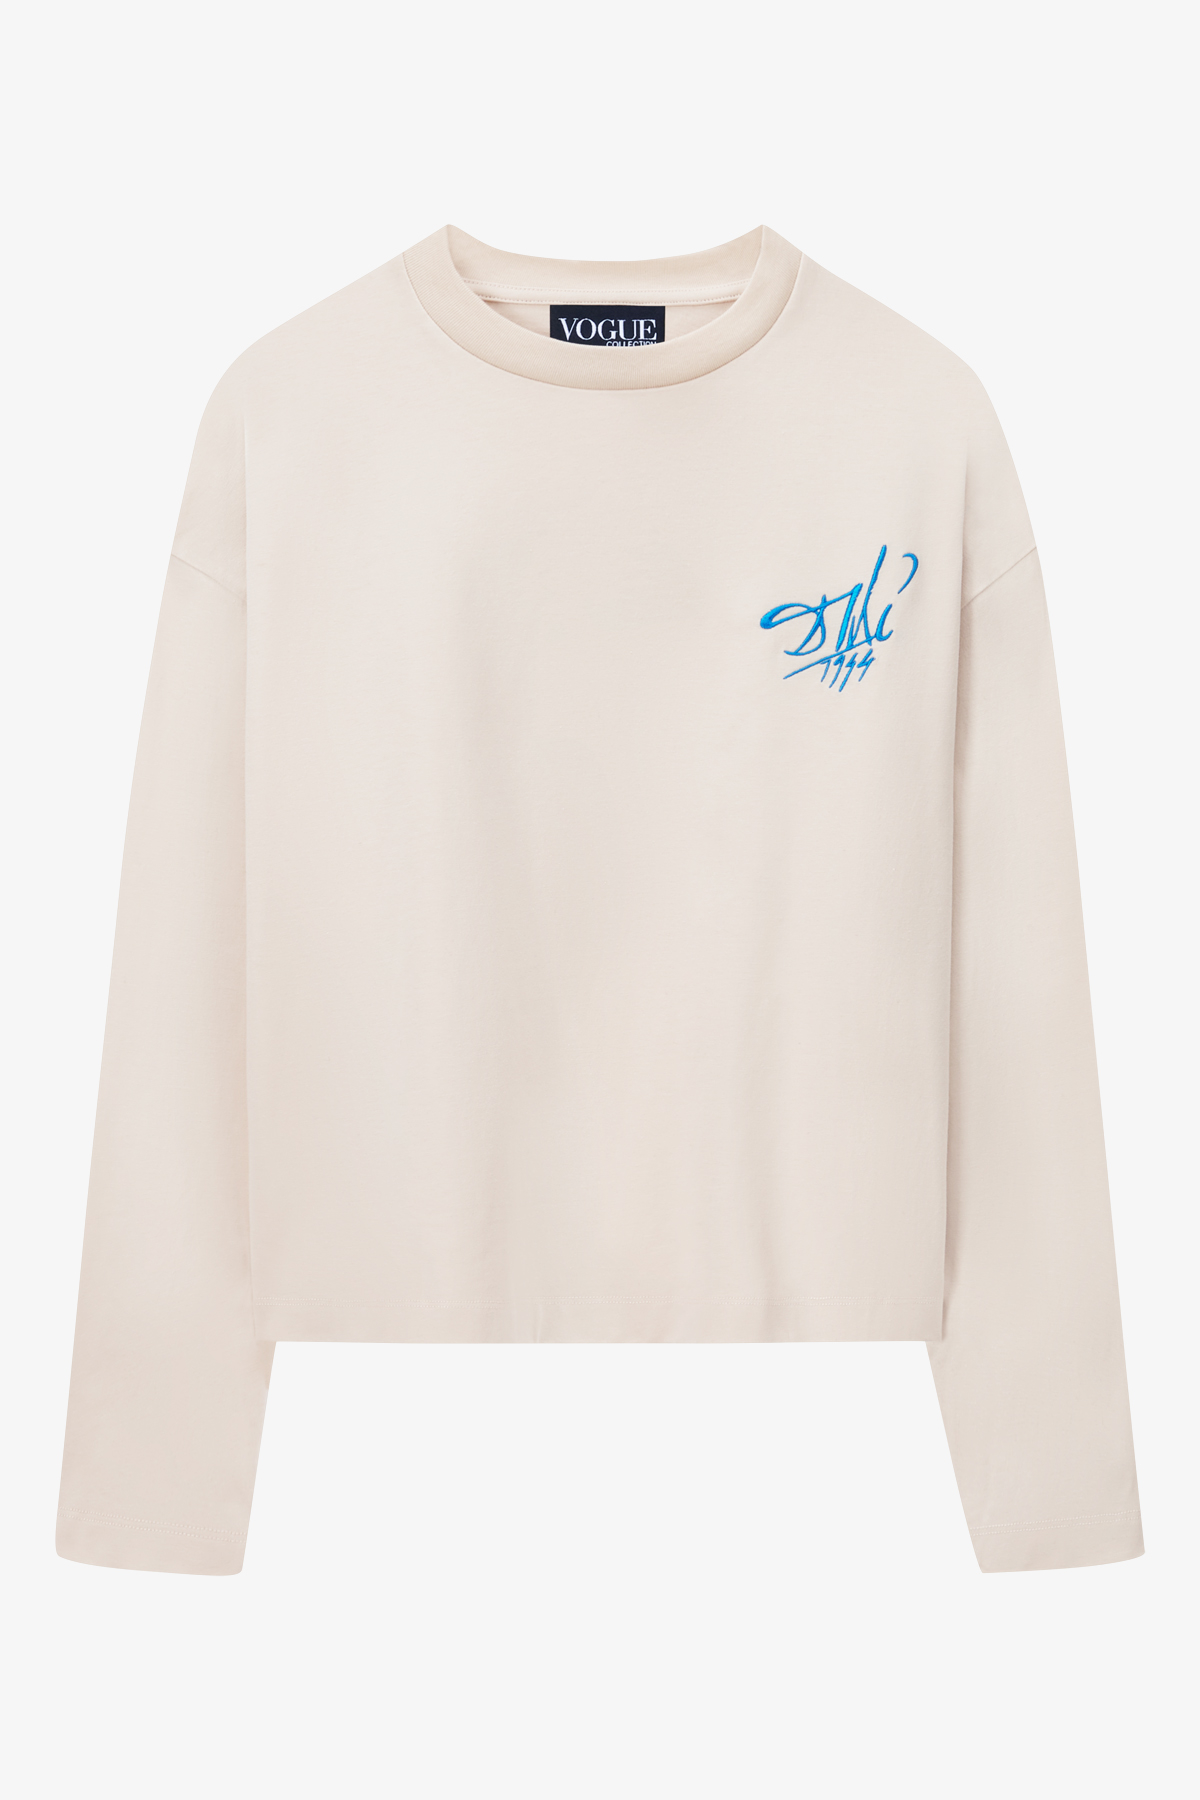 VOGUE Collection Dali Longsleeve S/M